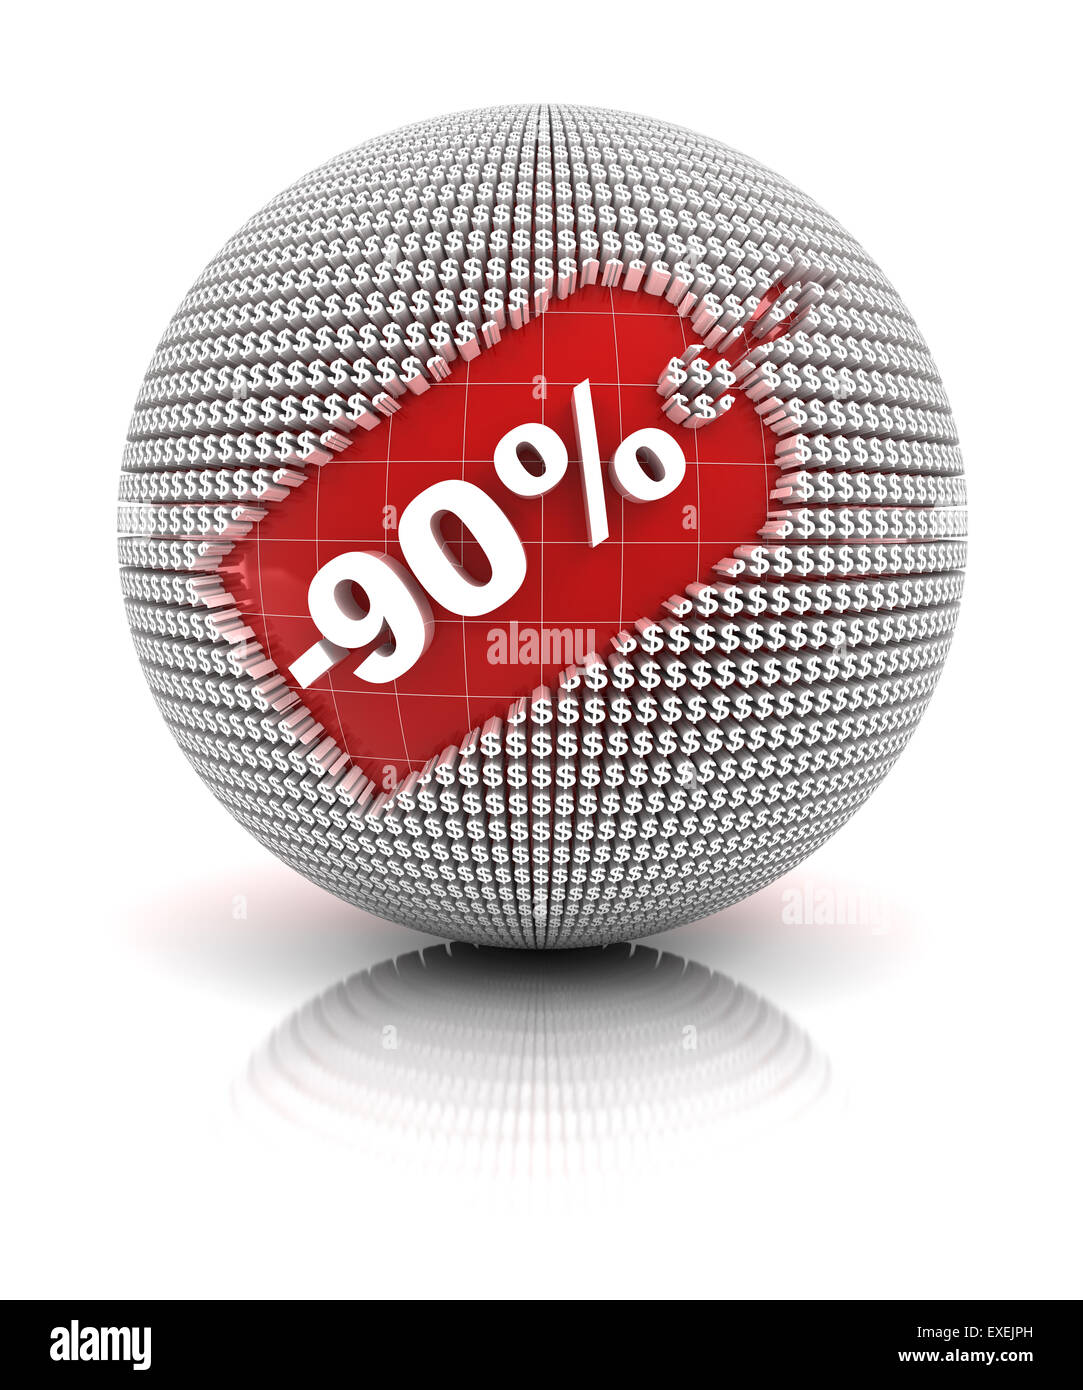 90 percent off sale tag on a sphere Stock Photo